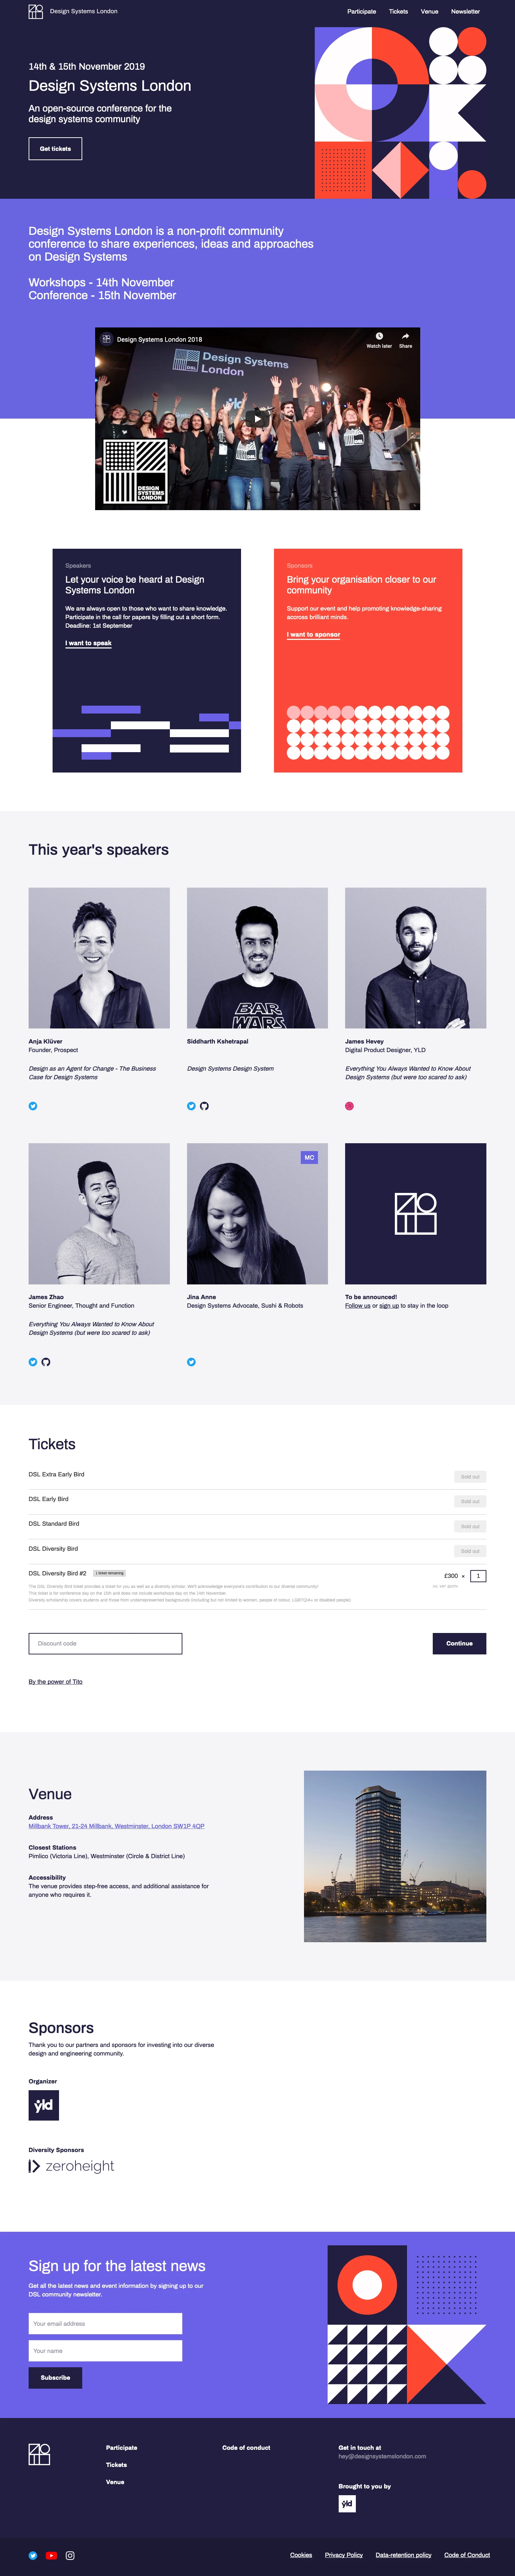 Design Systems London Landing Page Example: Design Systems London is a non-profit community conference to share experiences, ideas and approaches on Design Systems